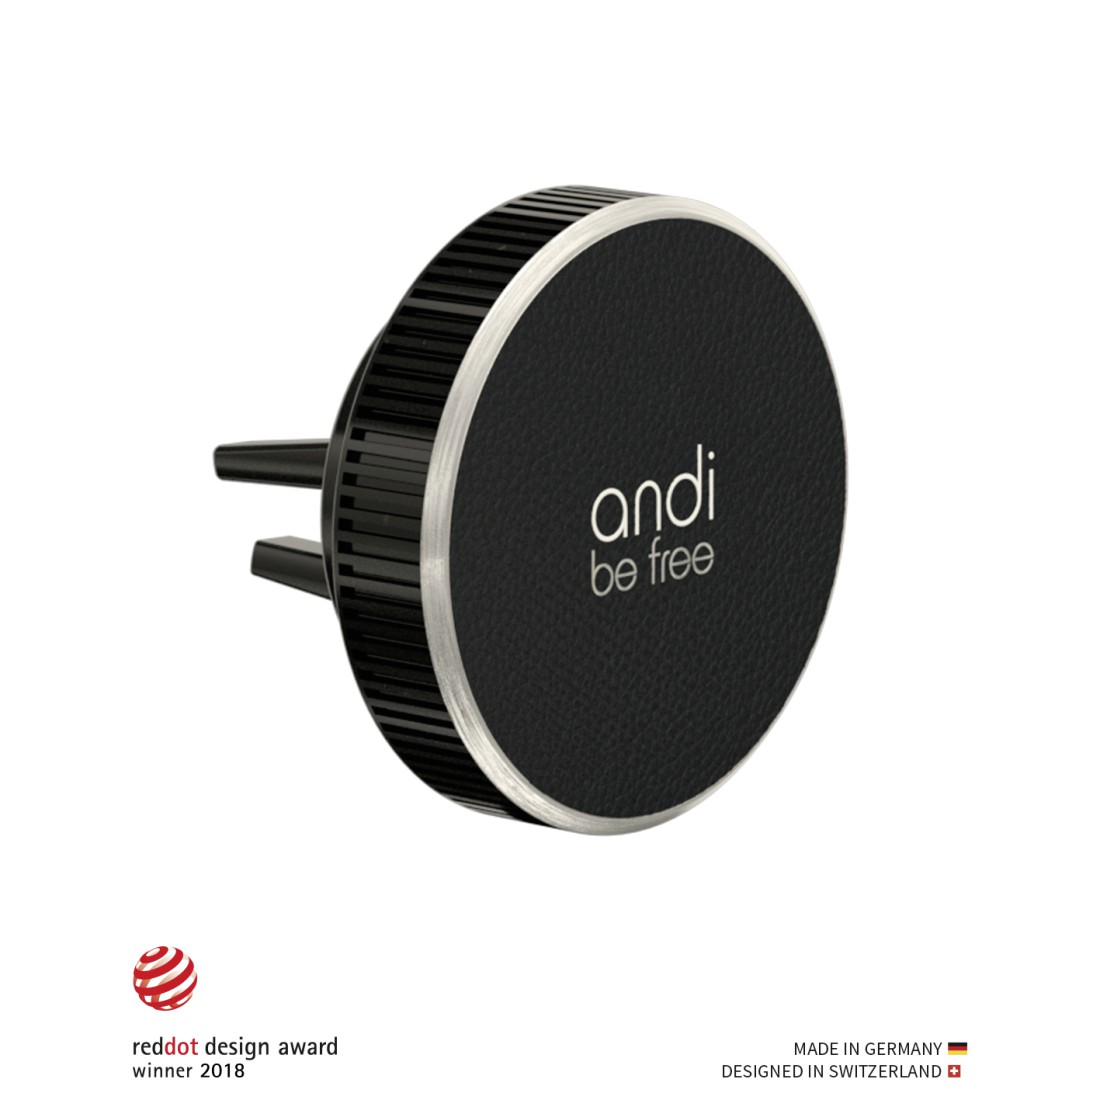 ANDI BE Wireless Schwarz Charger Mount induktive Fast FREE ladestation, Vent